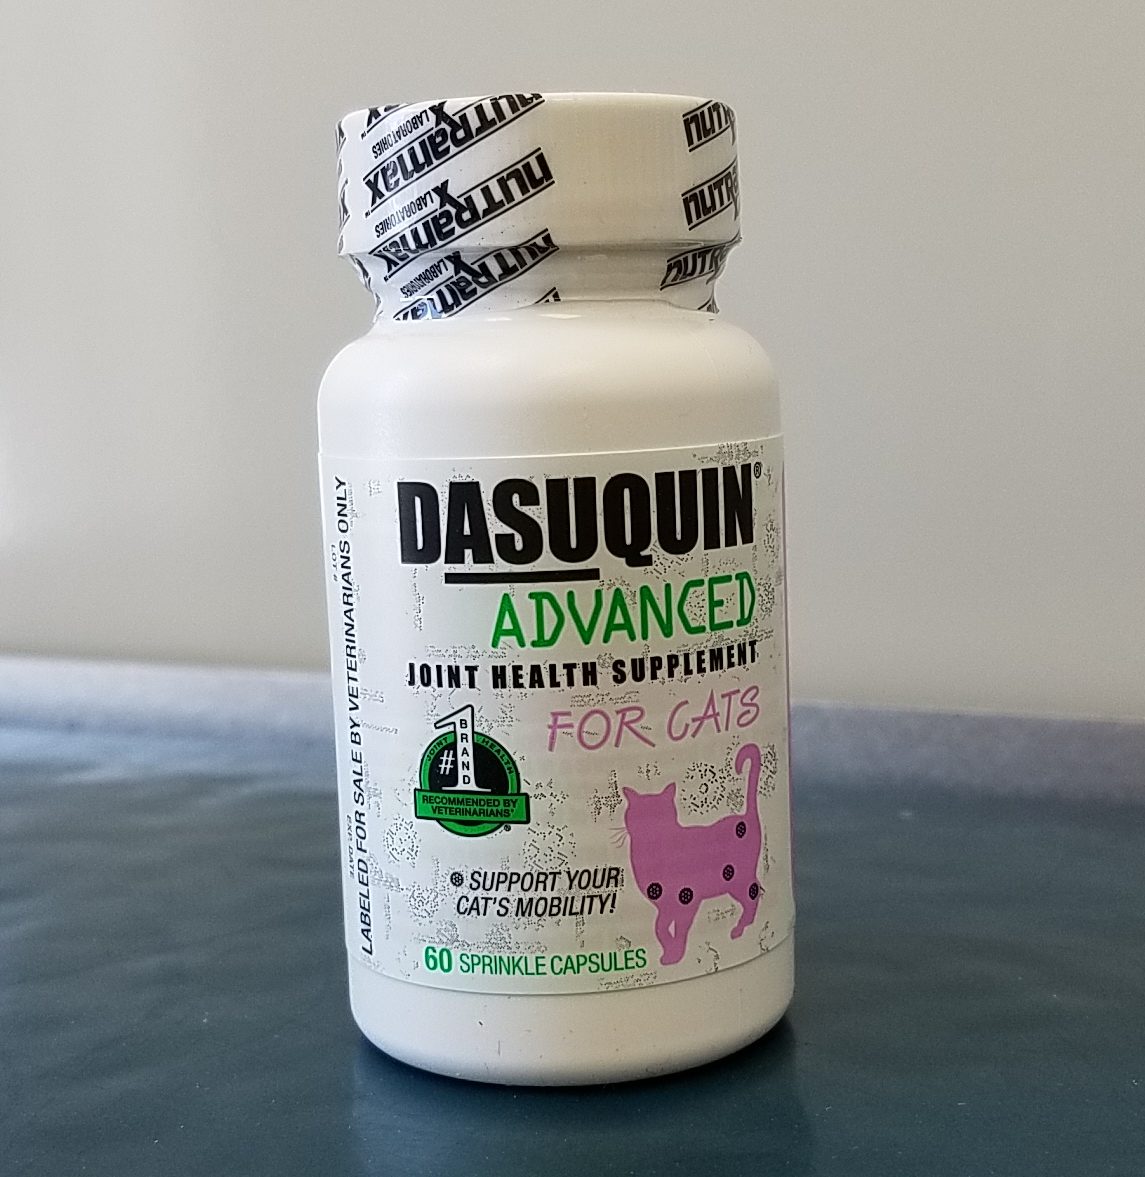 56 Top Pictures Where To Buy Dasuquin Advanced For Cats / Dasuquin